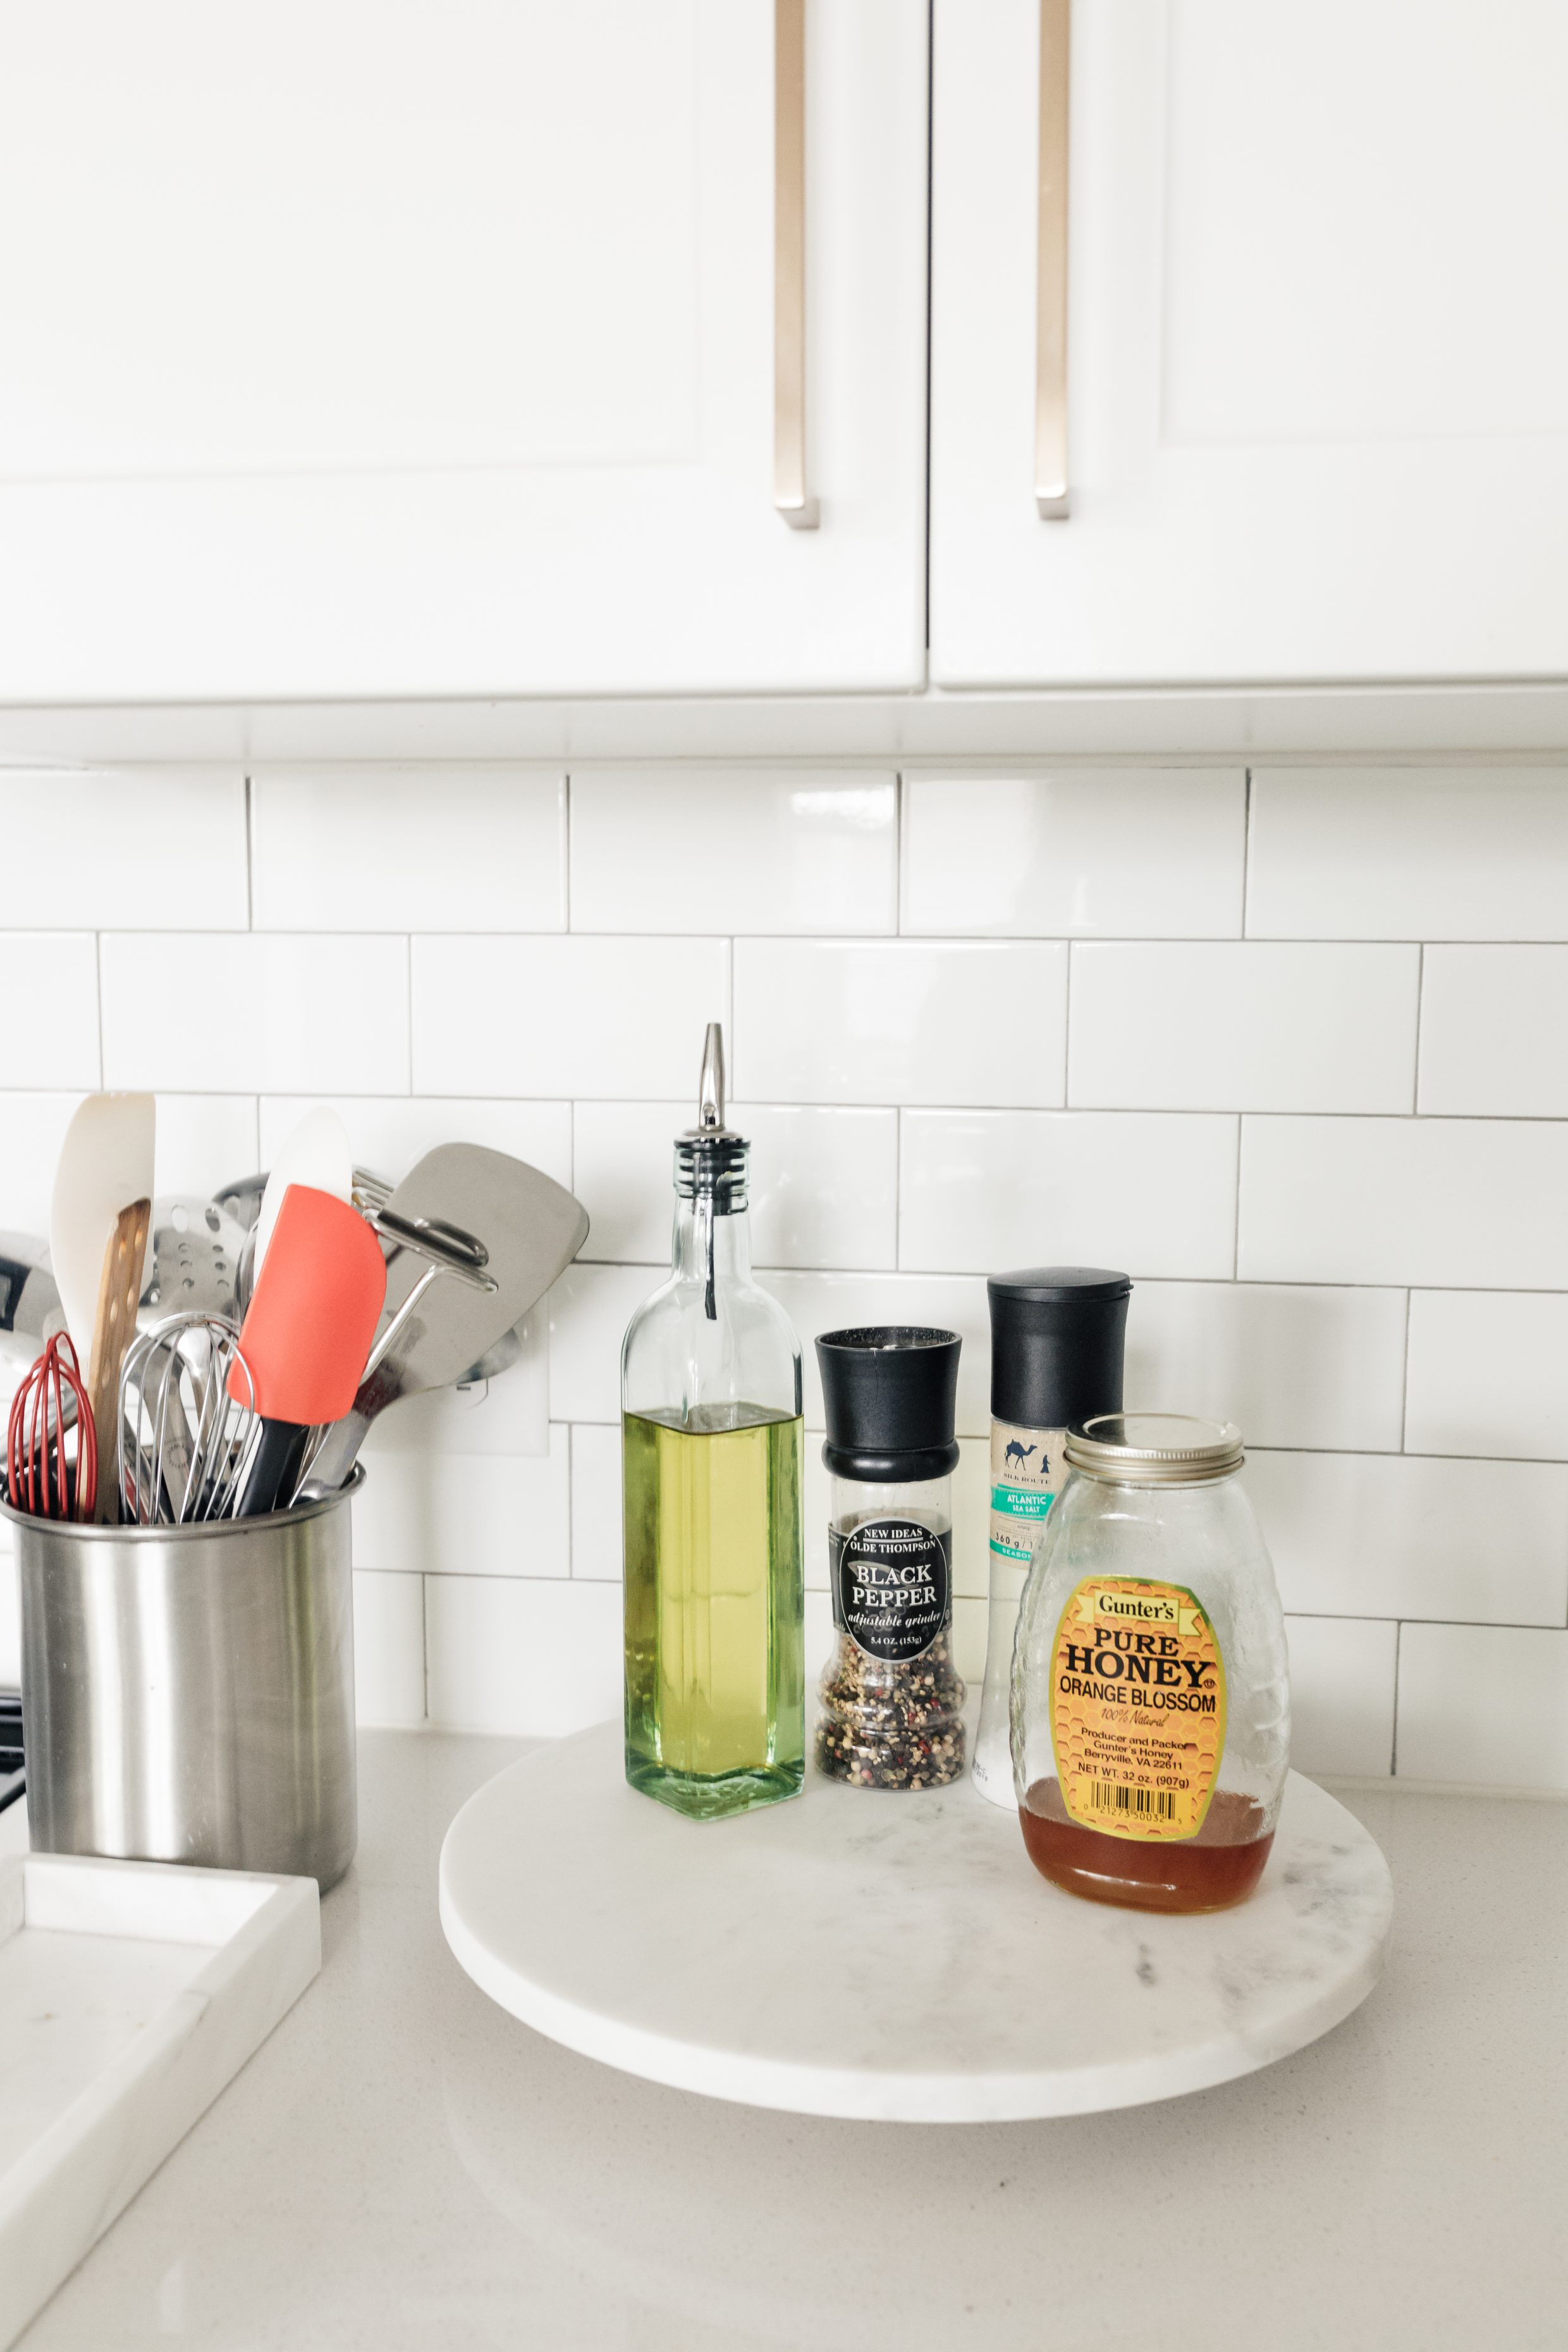 Blogger Hoang-Kim shares her four products for kitchen organization